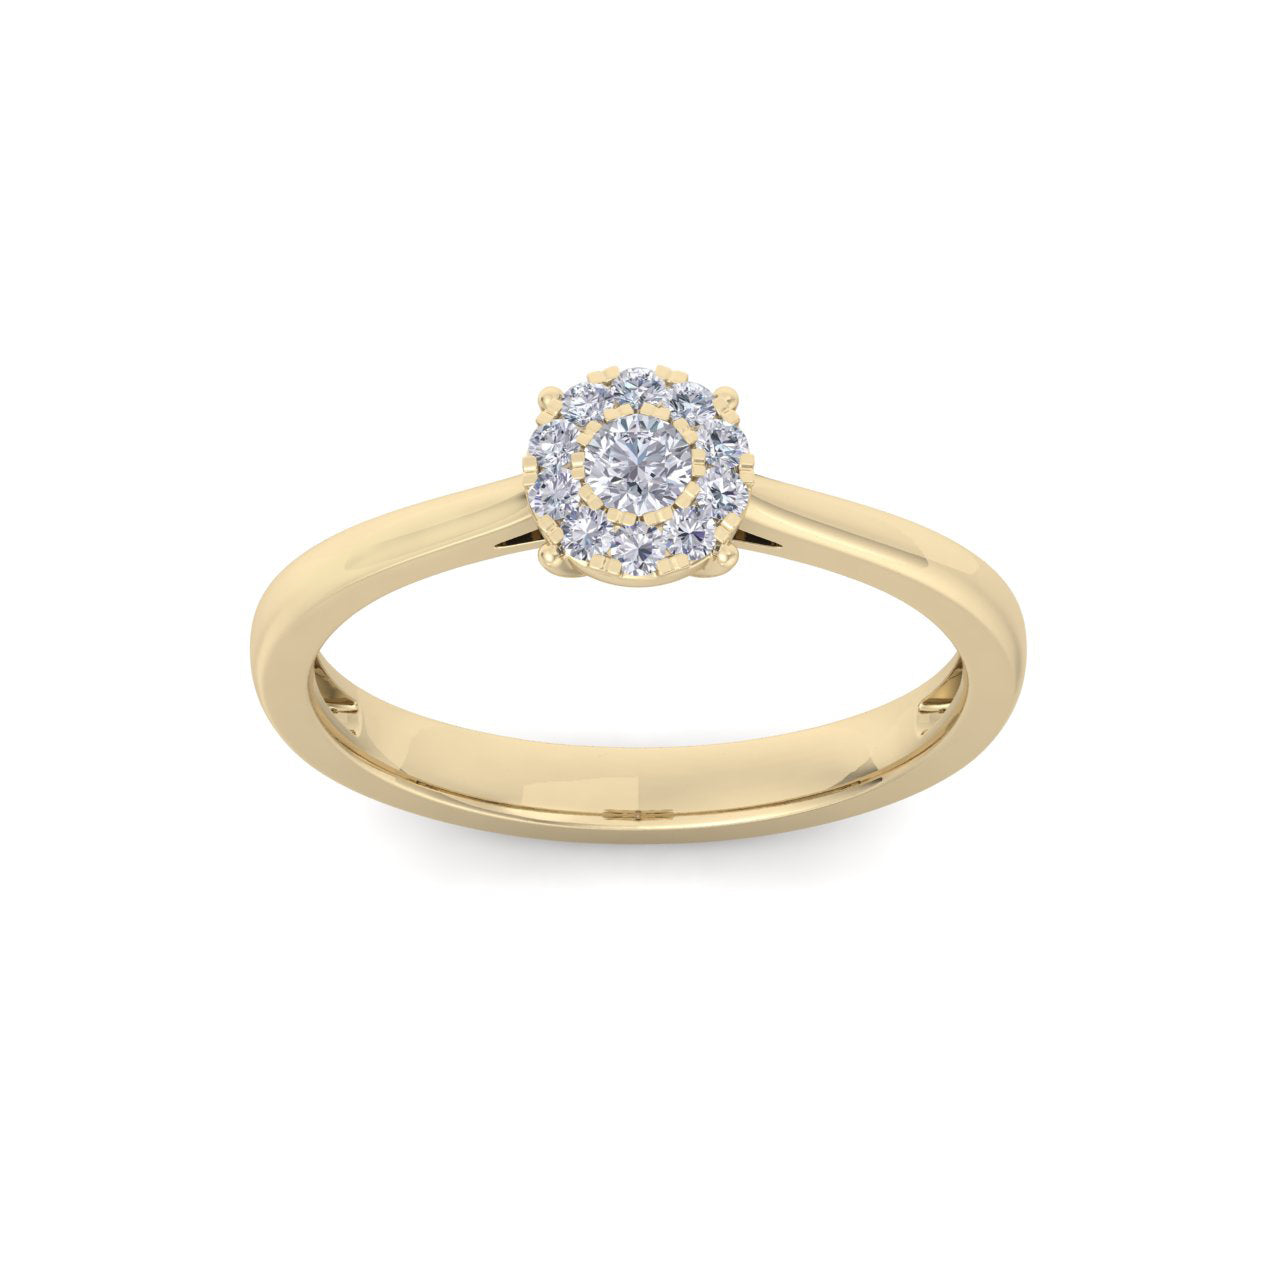 Halo engagement ring in yellow gold with white diamonds of 0.15 ct in weight